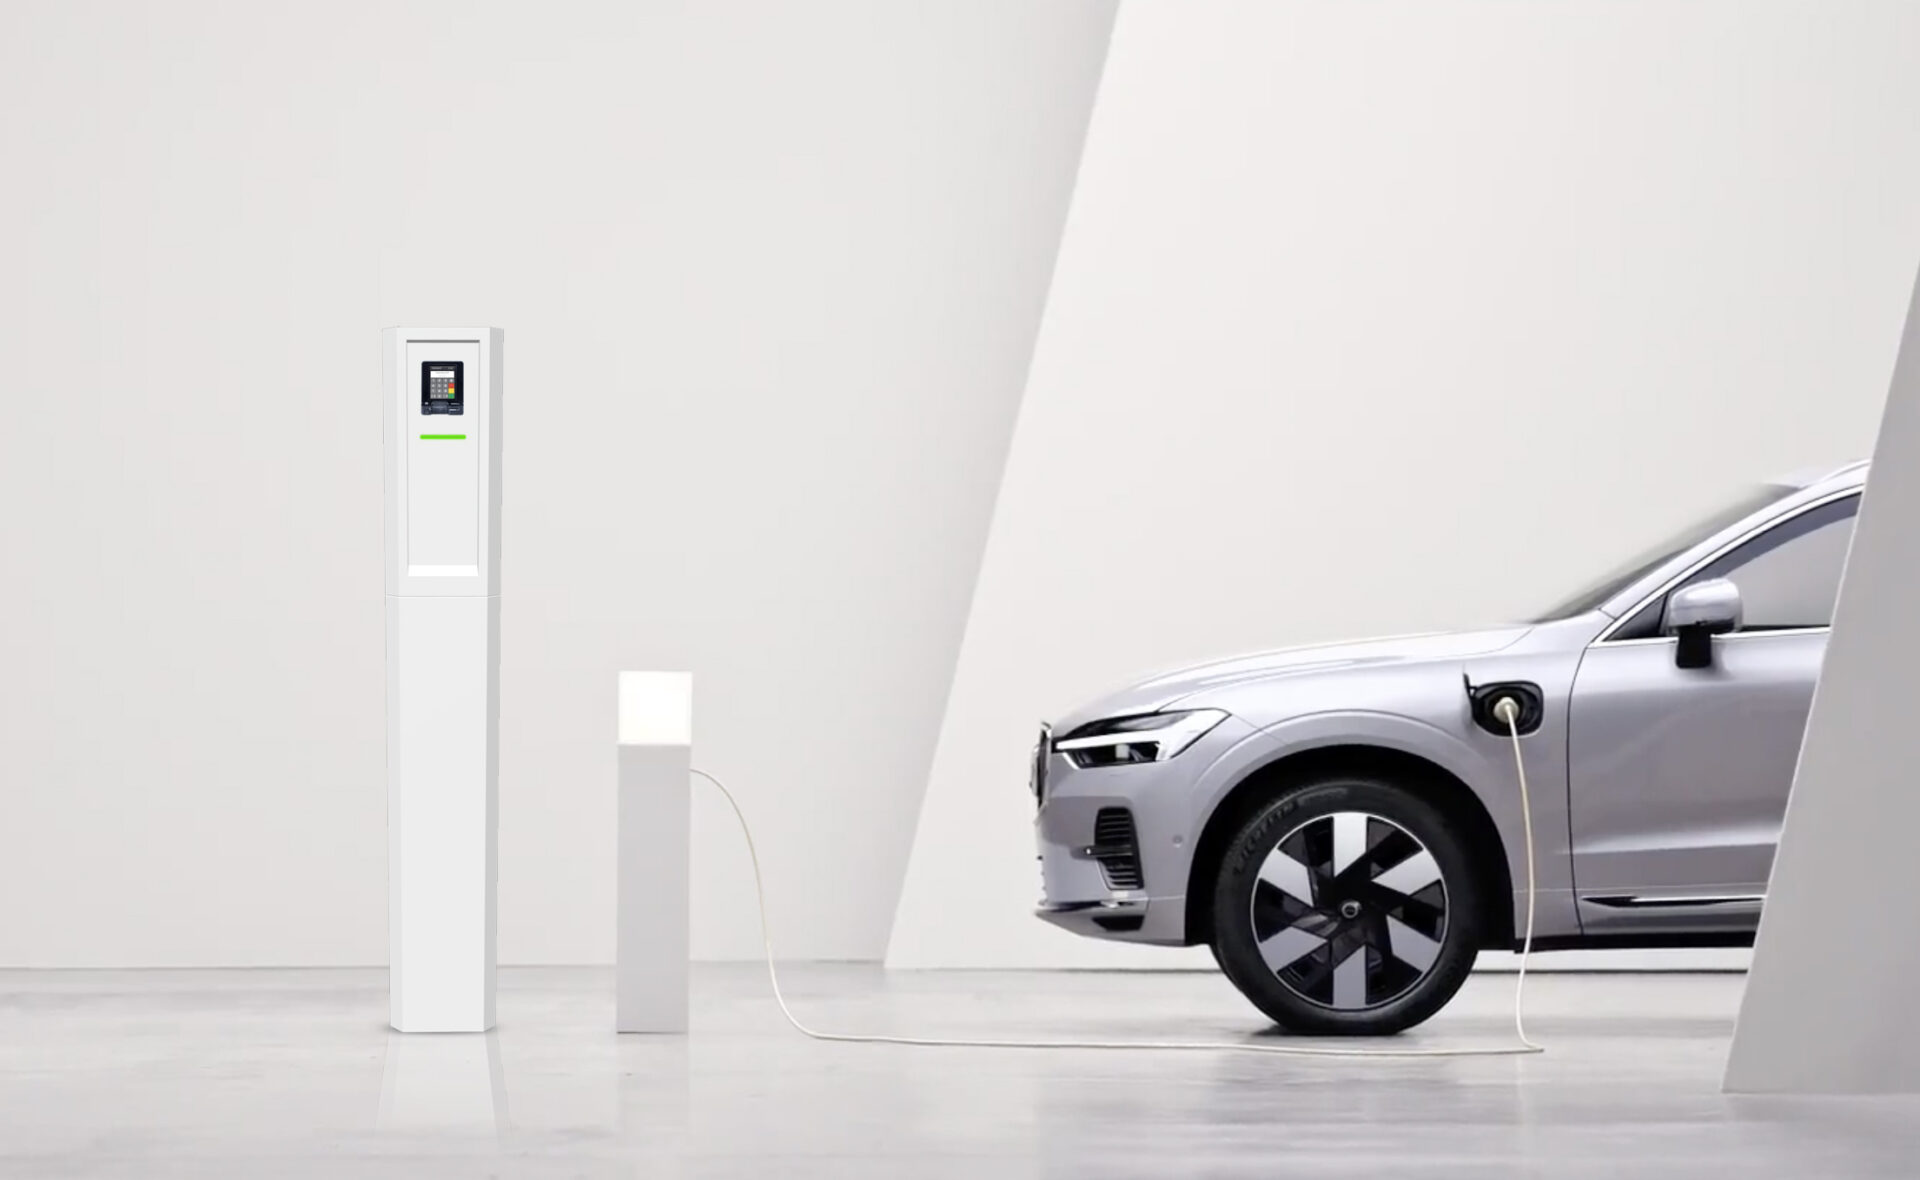 Cloudics will release a kiosk in 2023 for EV charging that will support card payments.